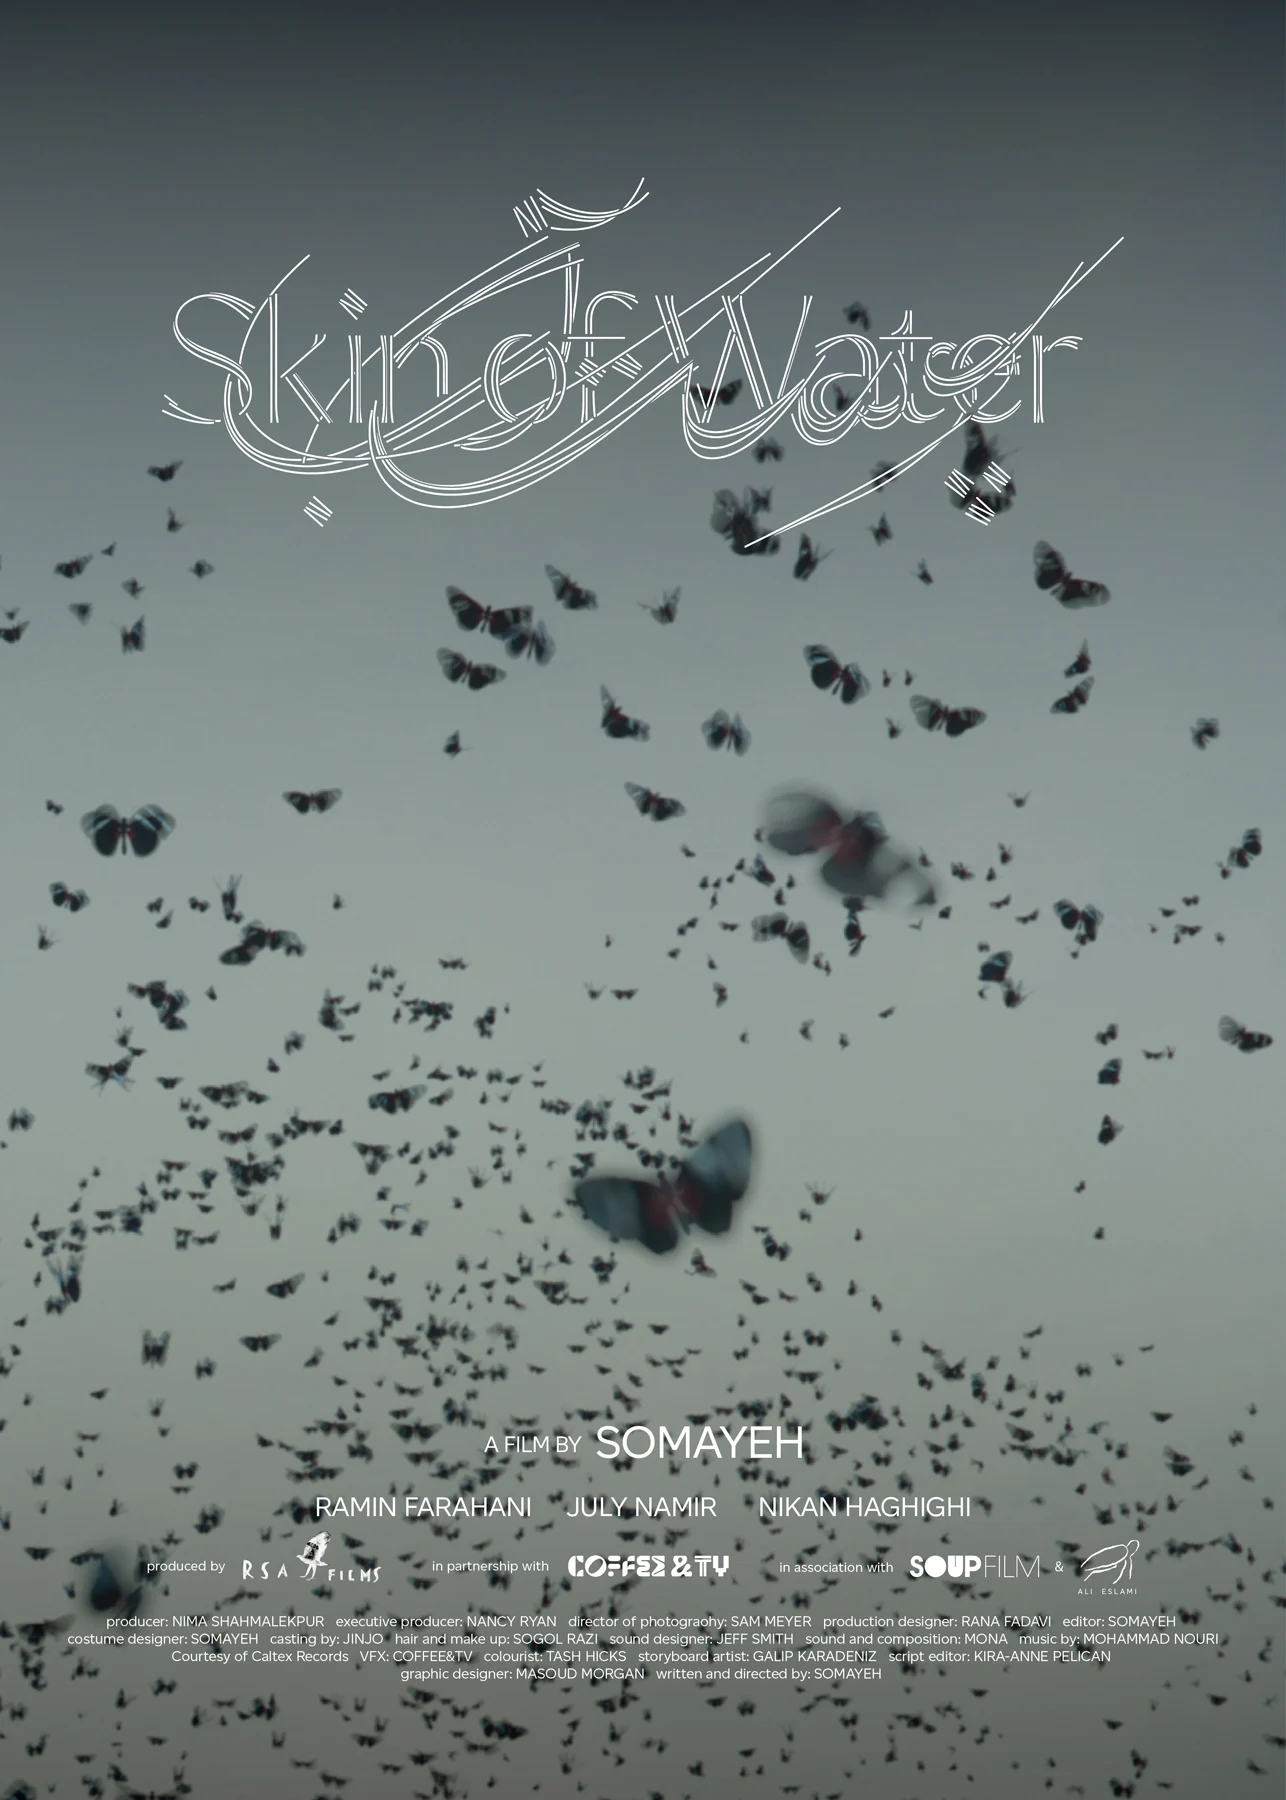 A poster for Somayeh's film “Skin of Water”, including an image of butterflies flying before a clear blue sky, the film's title overlaid.